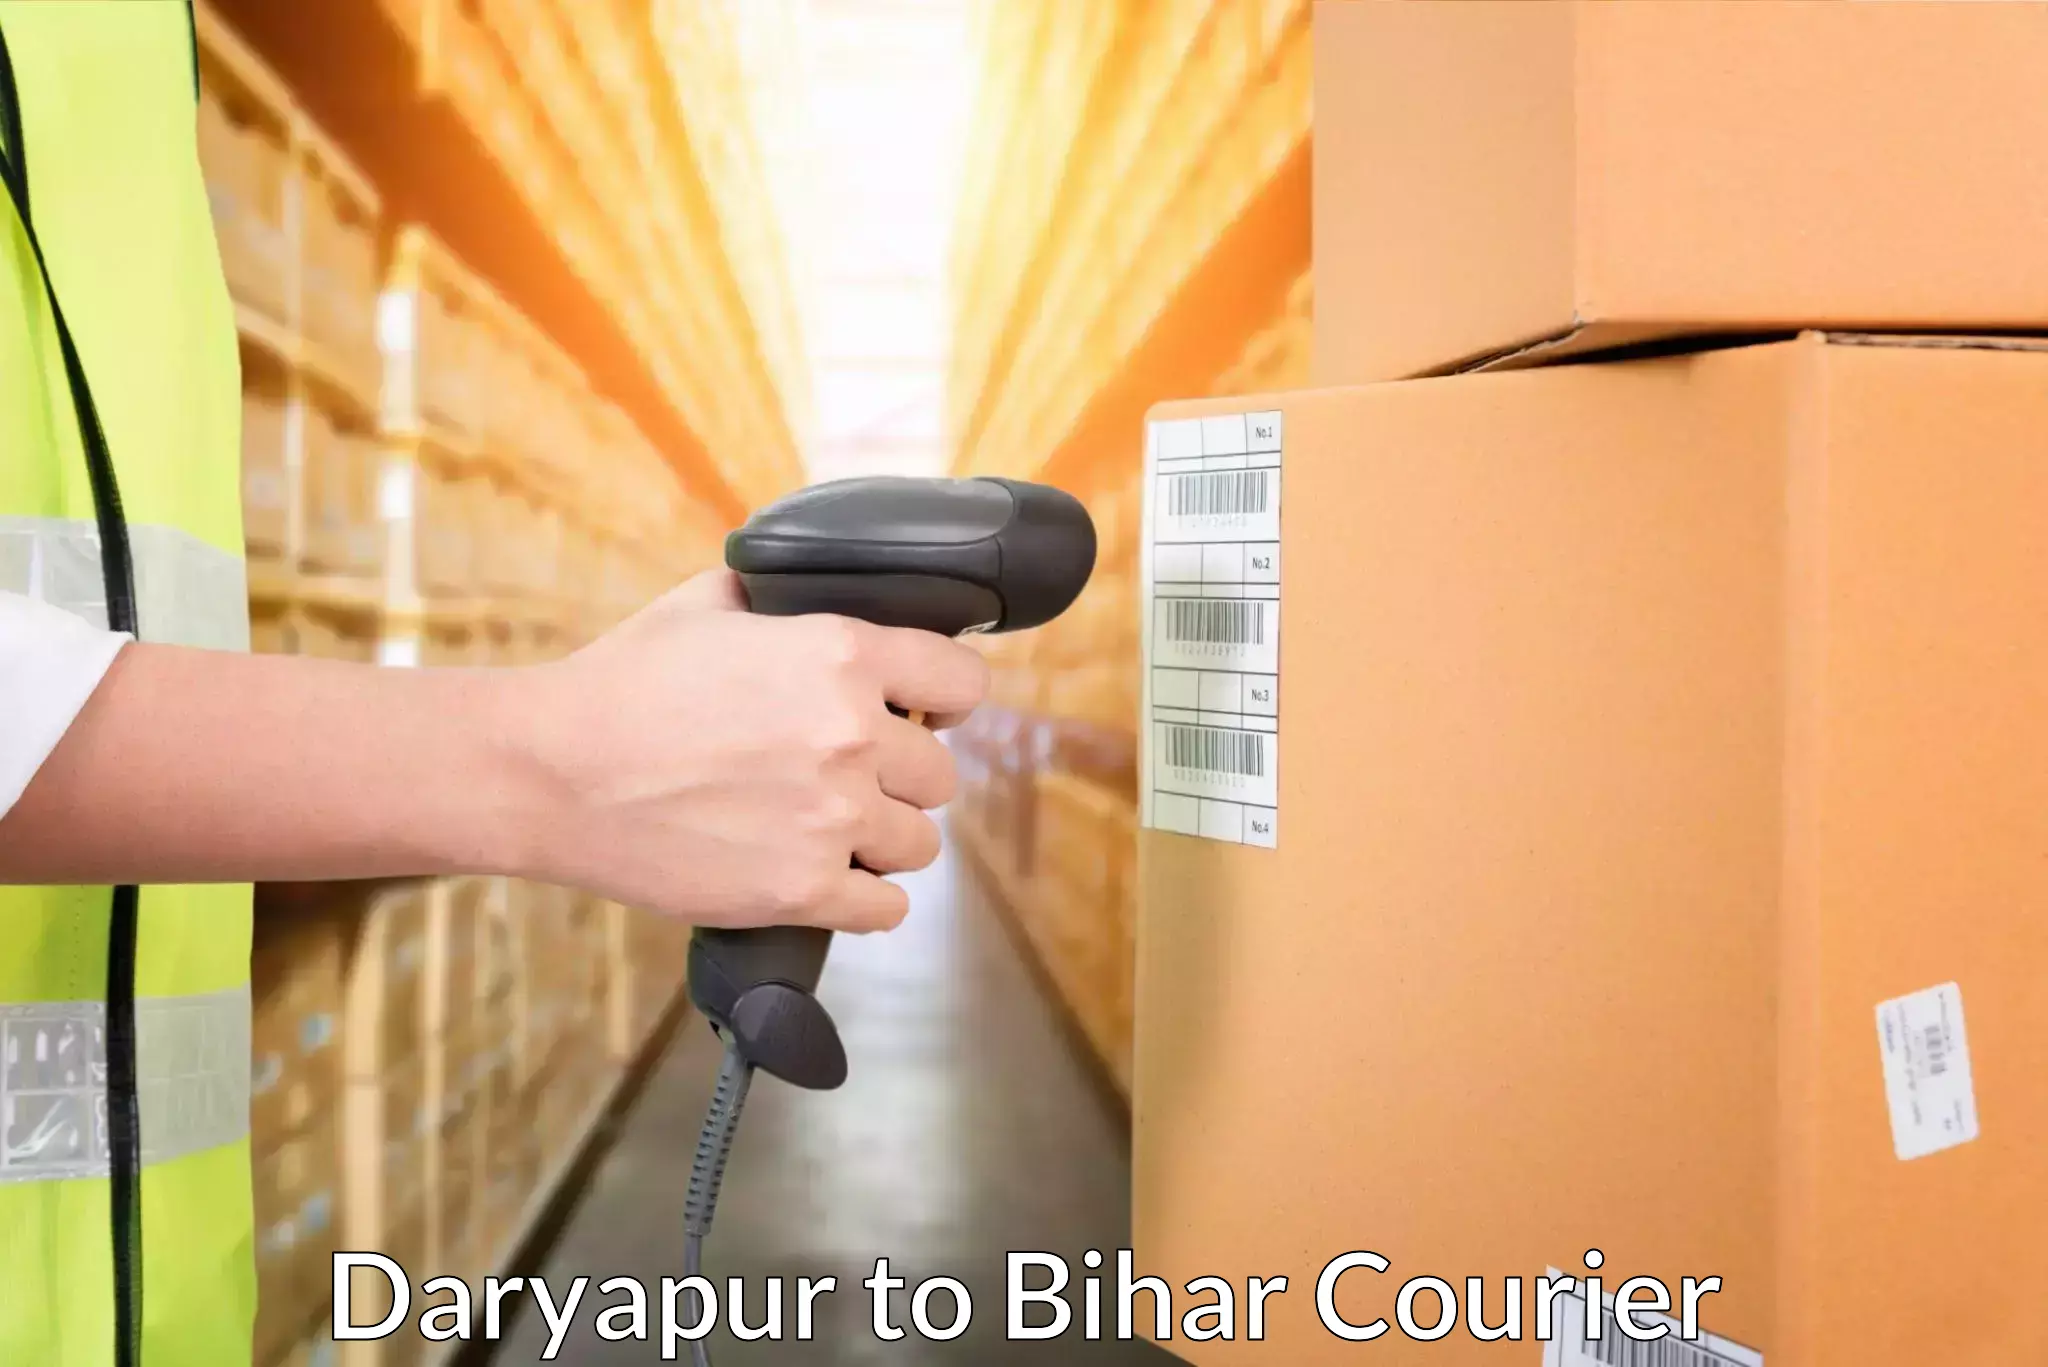 Fast shipping solutions Daryapur to Hasanpura